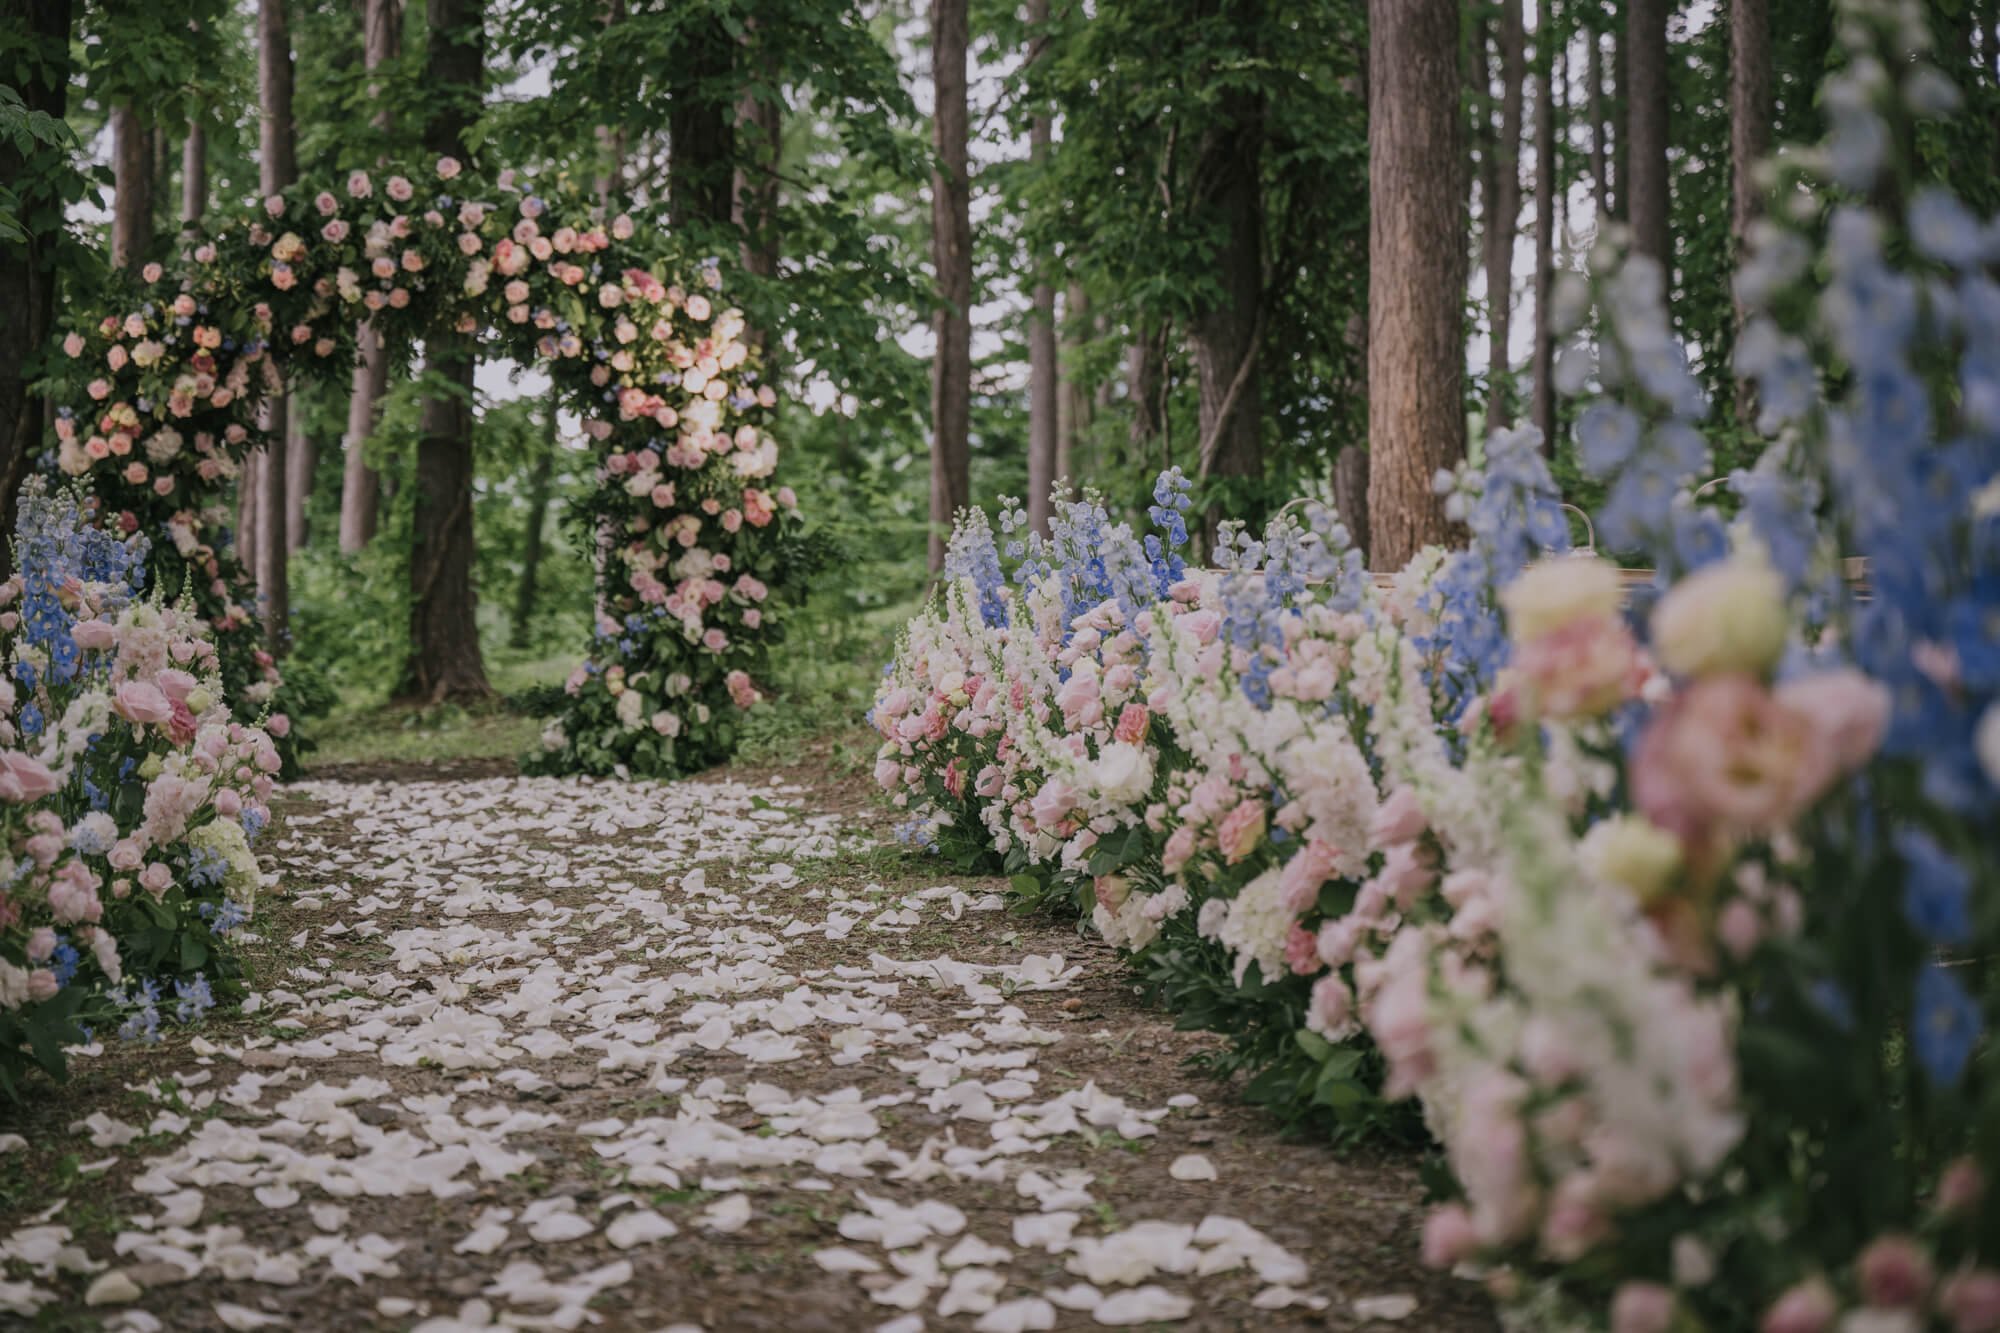 Wedding aisle covered in petals and lined with flowers